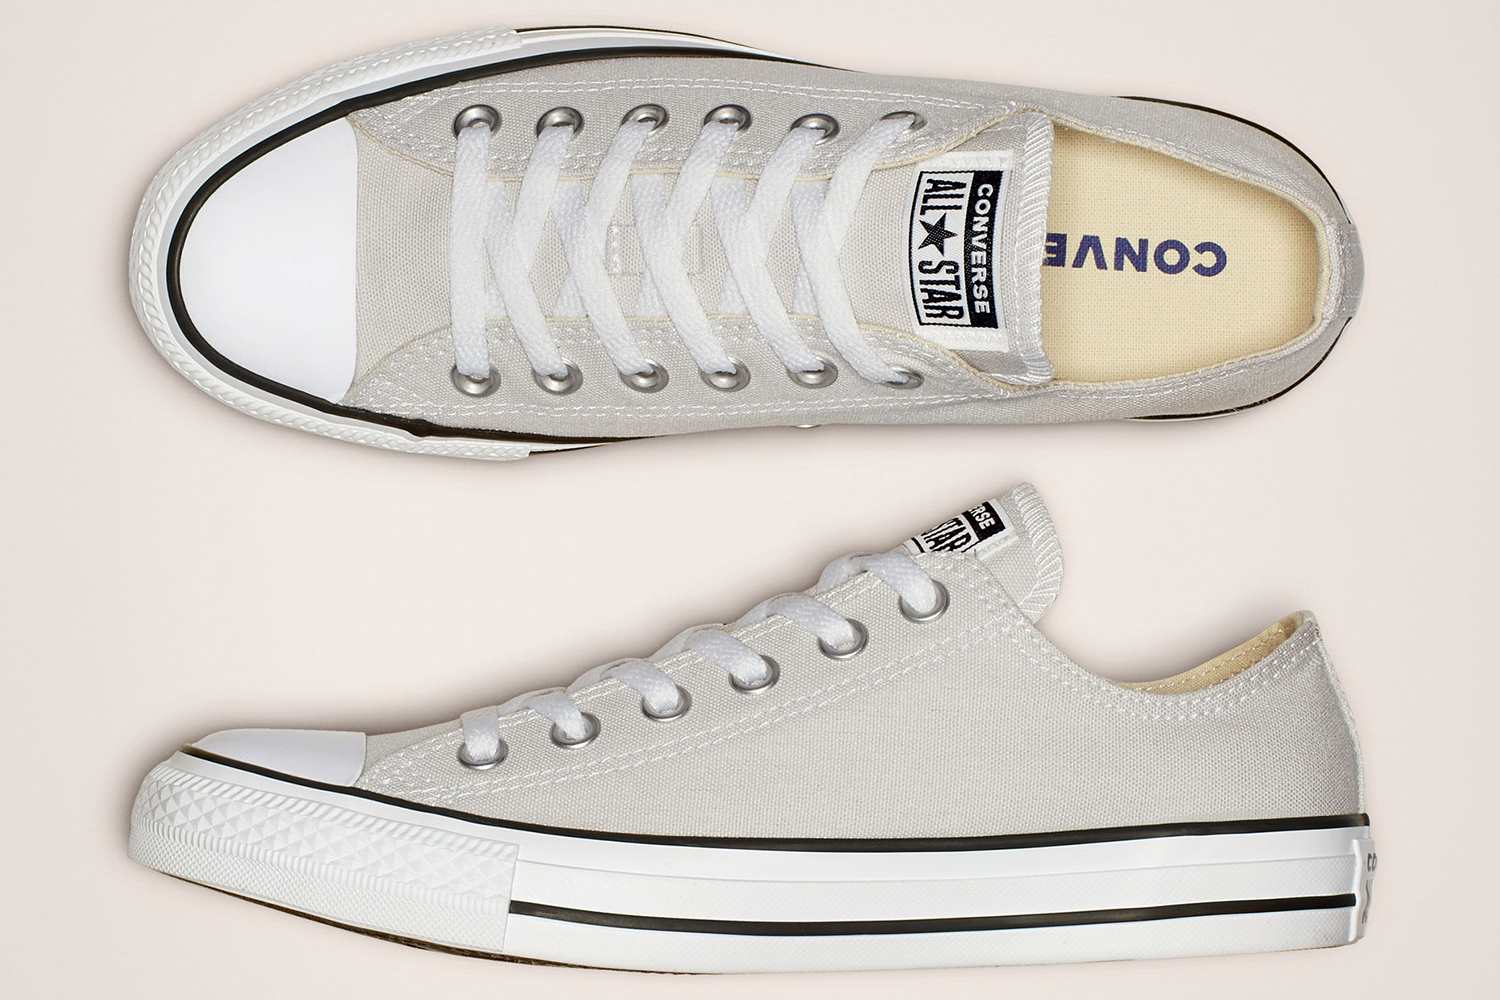 Classic Converse Sneakers Under $30 